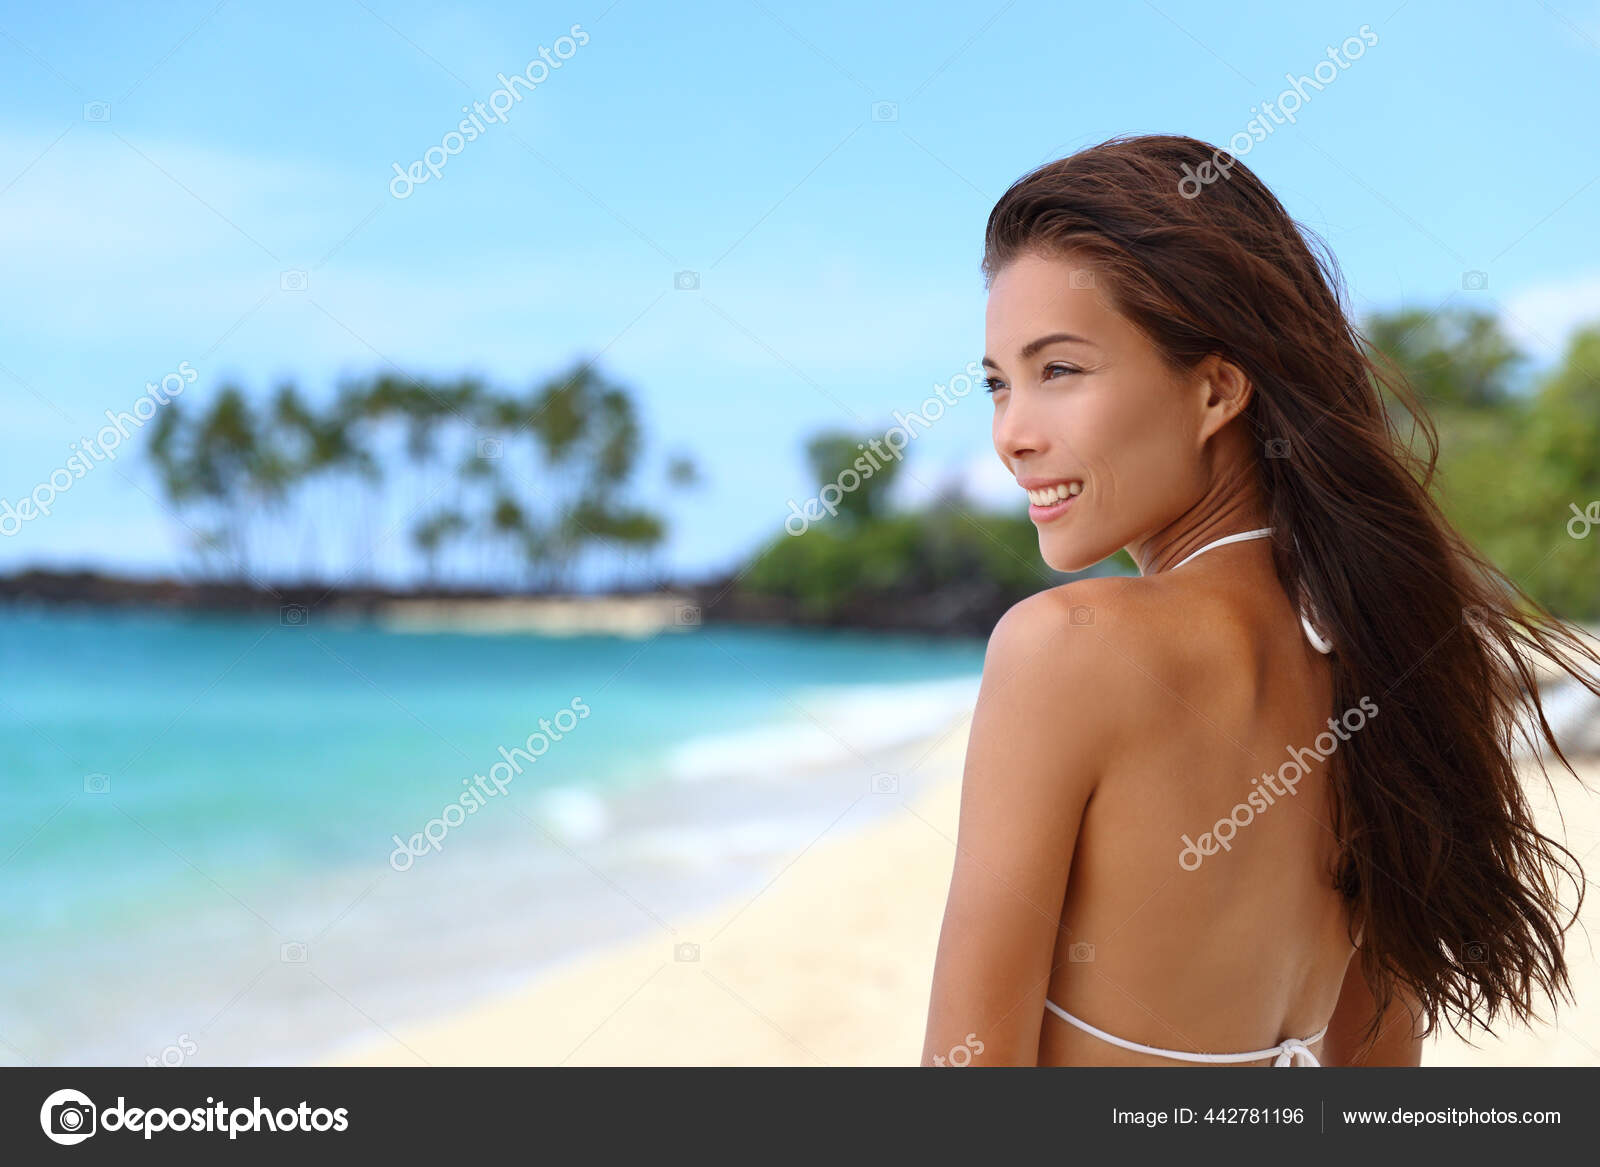 Sexy Bikini Body Asian Woman With Fit Stomach Abs And Slim Waist. Weight  Loss Treatment Concept. Beauty Swimsuit Model Lifestyle On Beach Vacation  Travel. Stock Photo, Picture and Royalty Free Image. Image